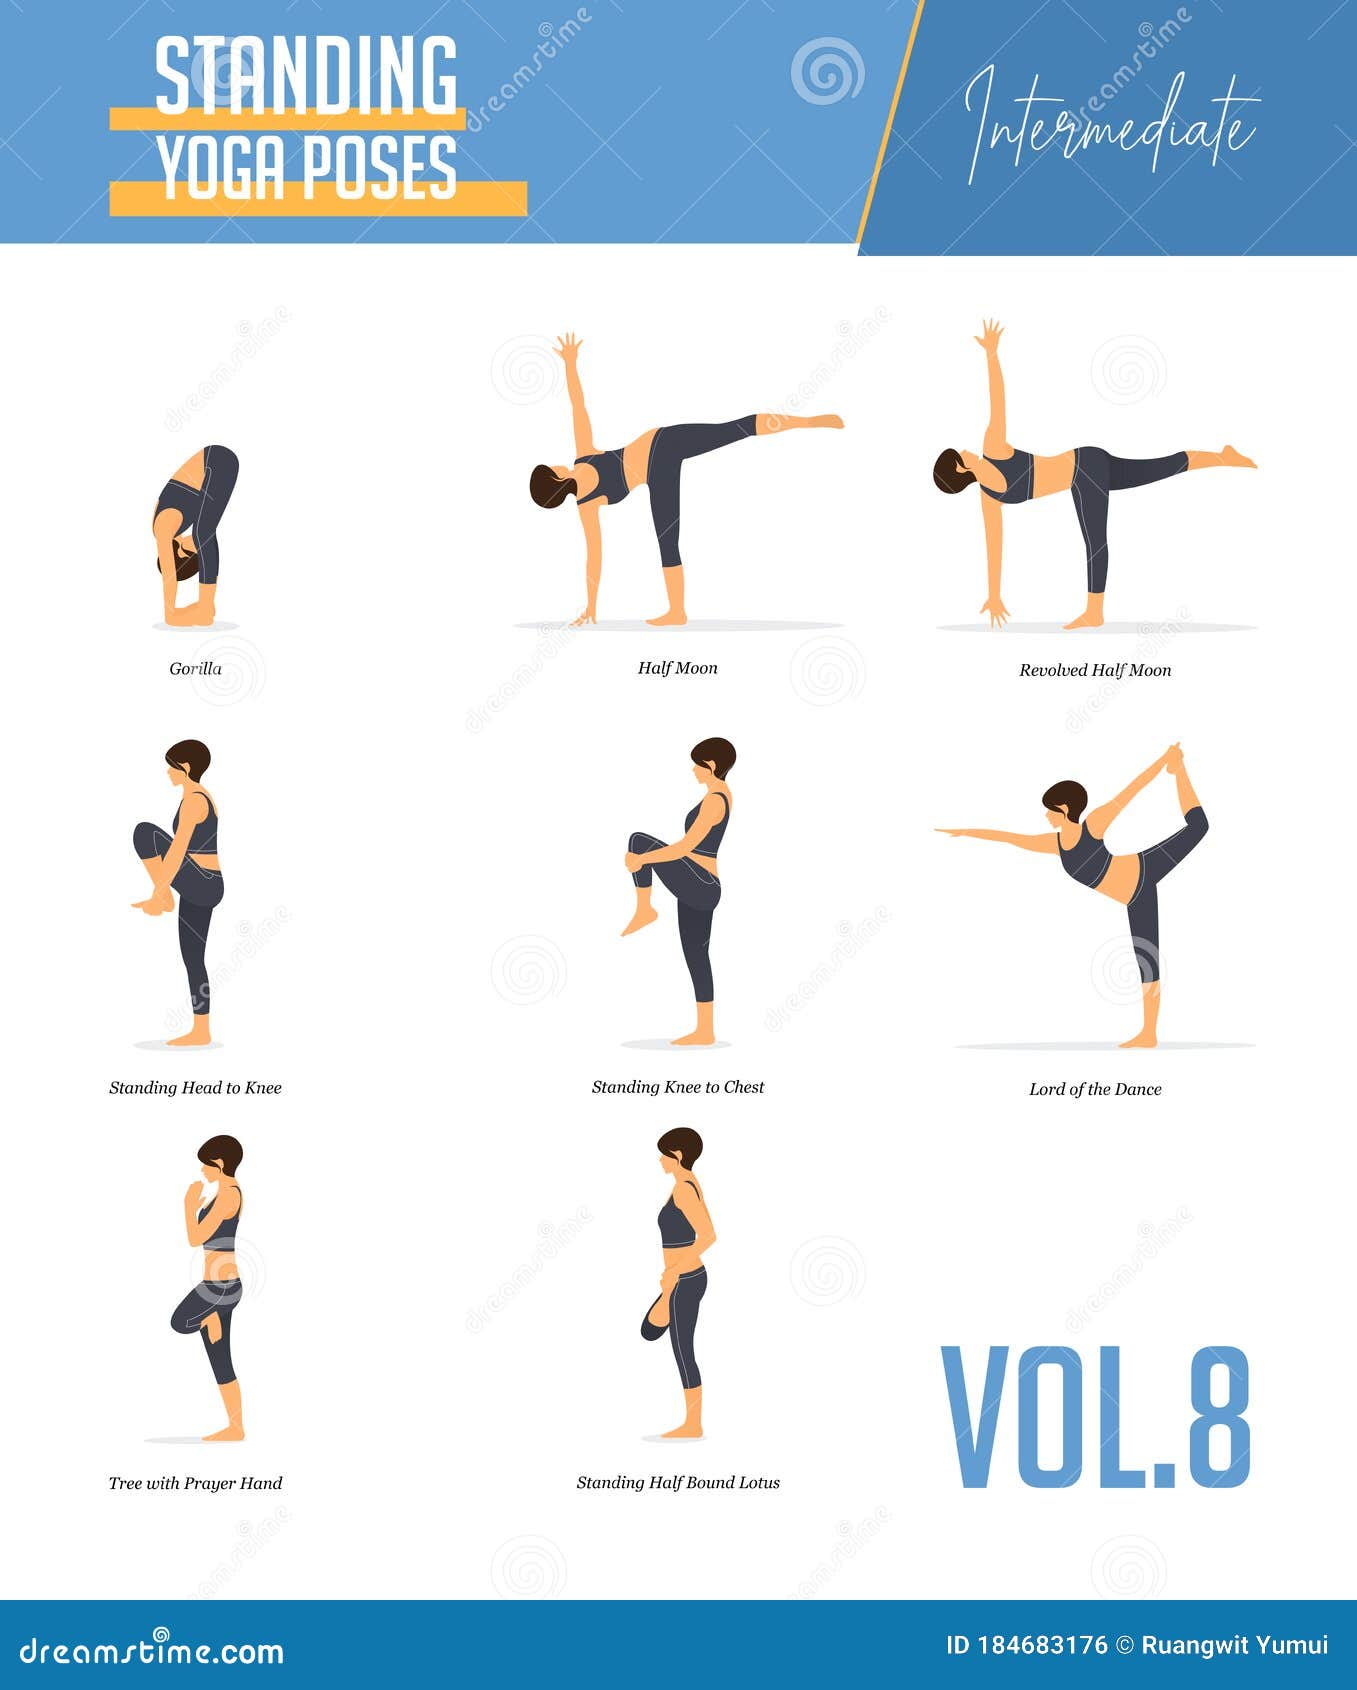 8 yoga poses for beginners infographic Royalty Free Vector